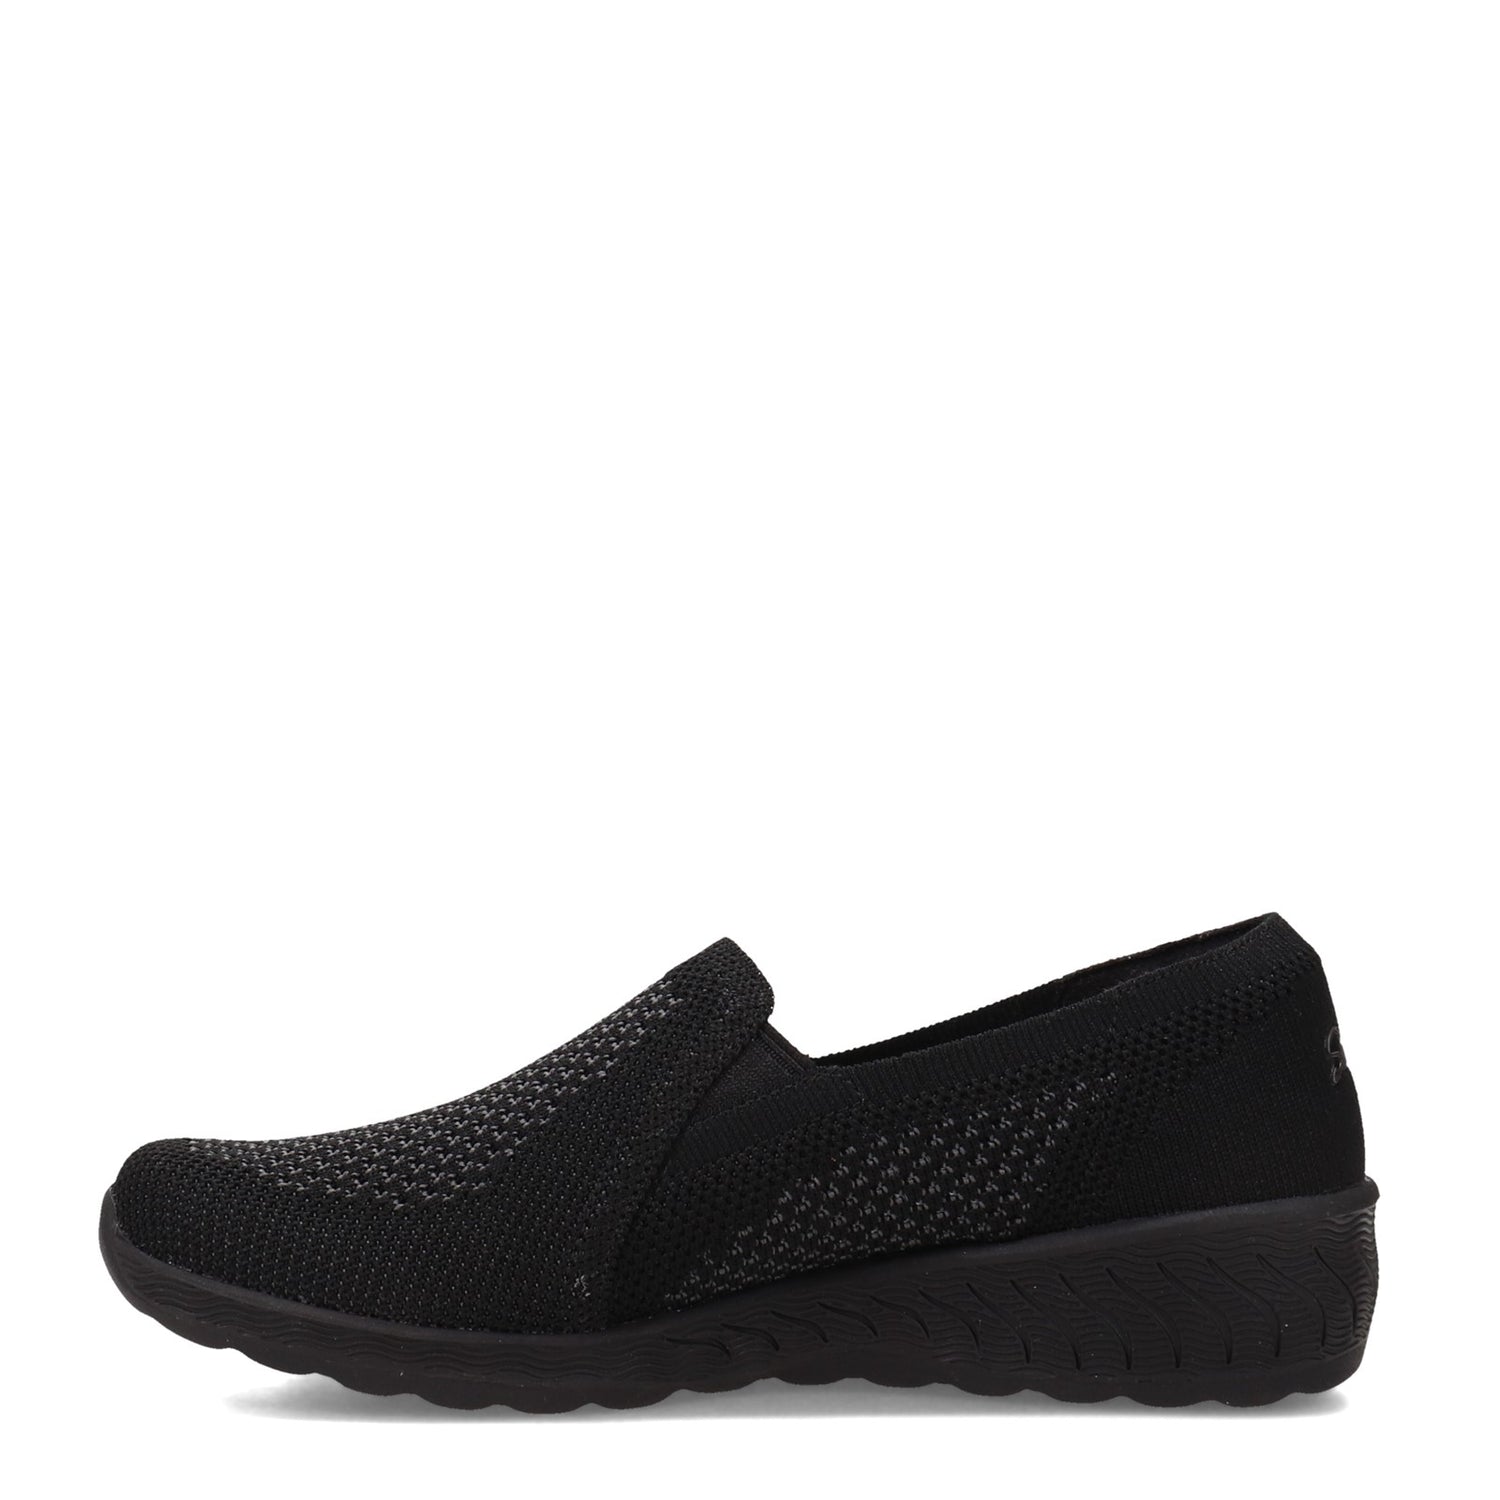 Peltz Shoes  Women's Skechers Relaxed Fit: Up-Lifted - New Rules Slip-On BLACK 100454-BBK